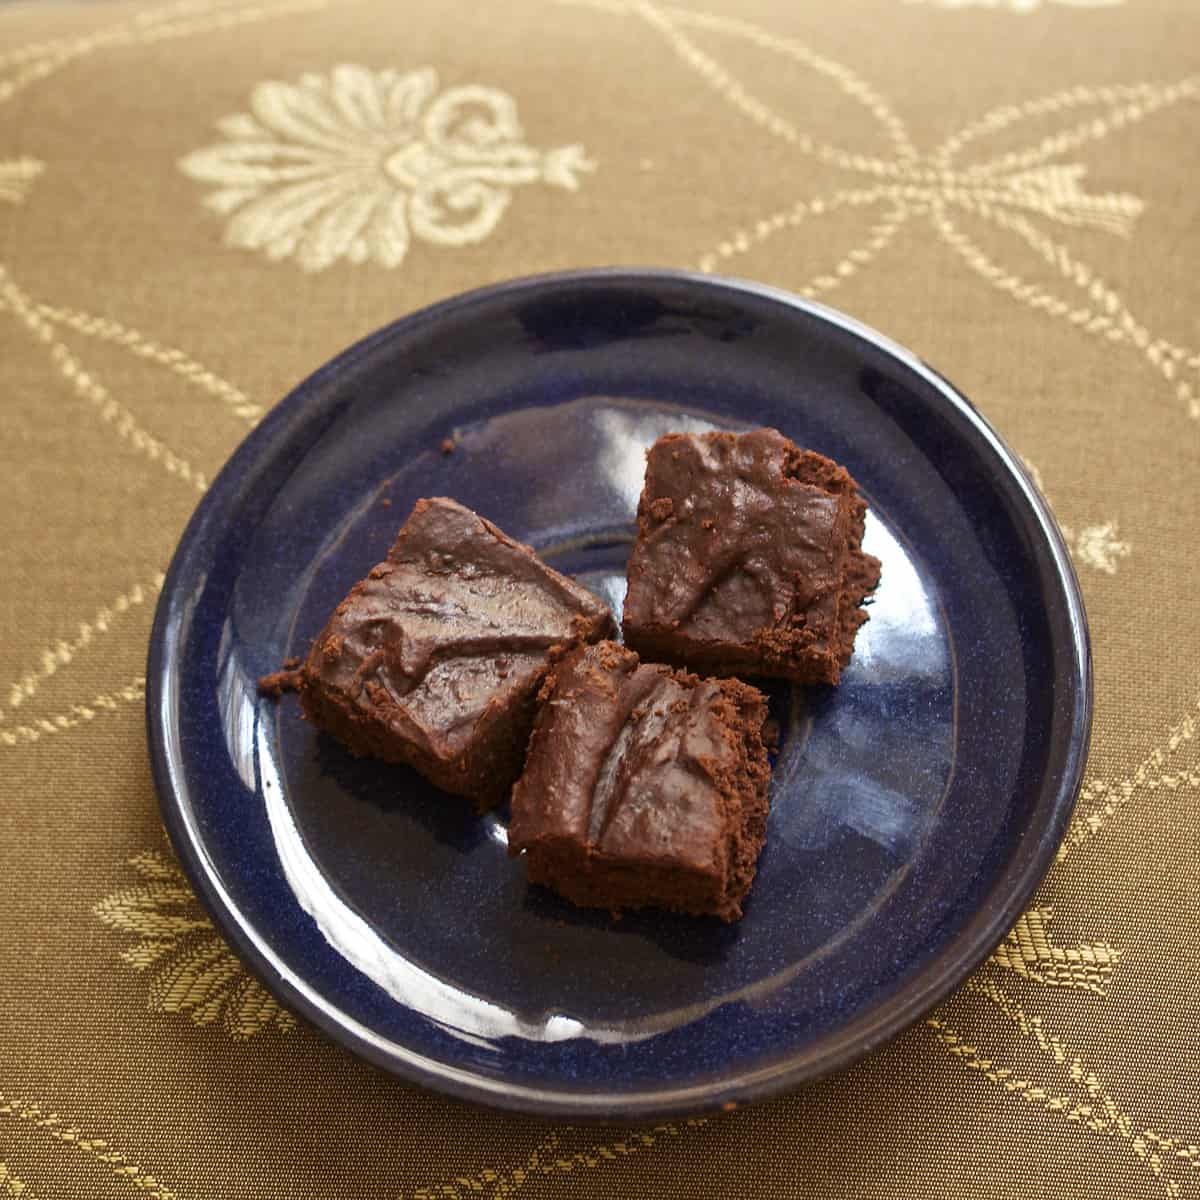 Three brownies with almond butter on a blue plate.